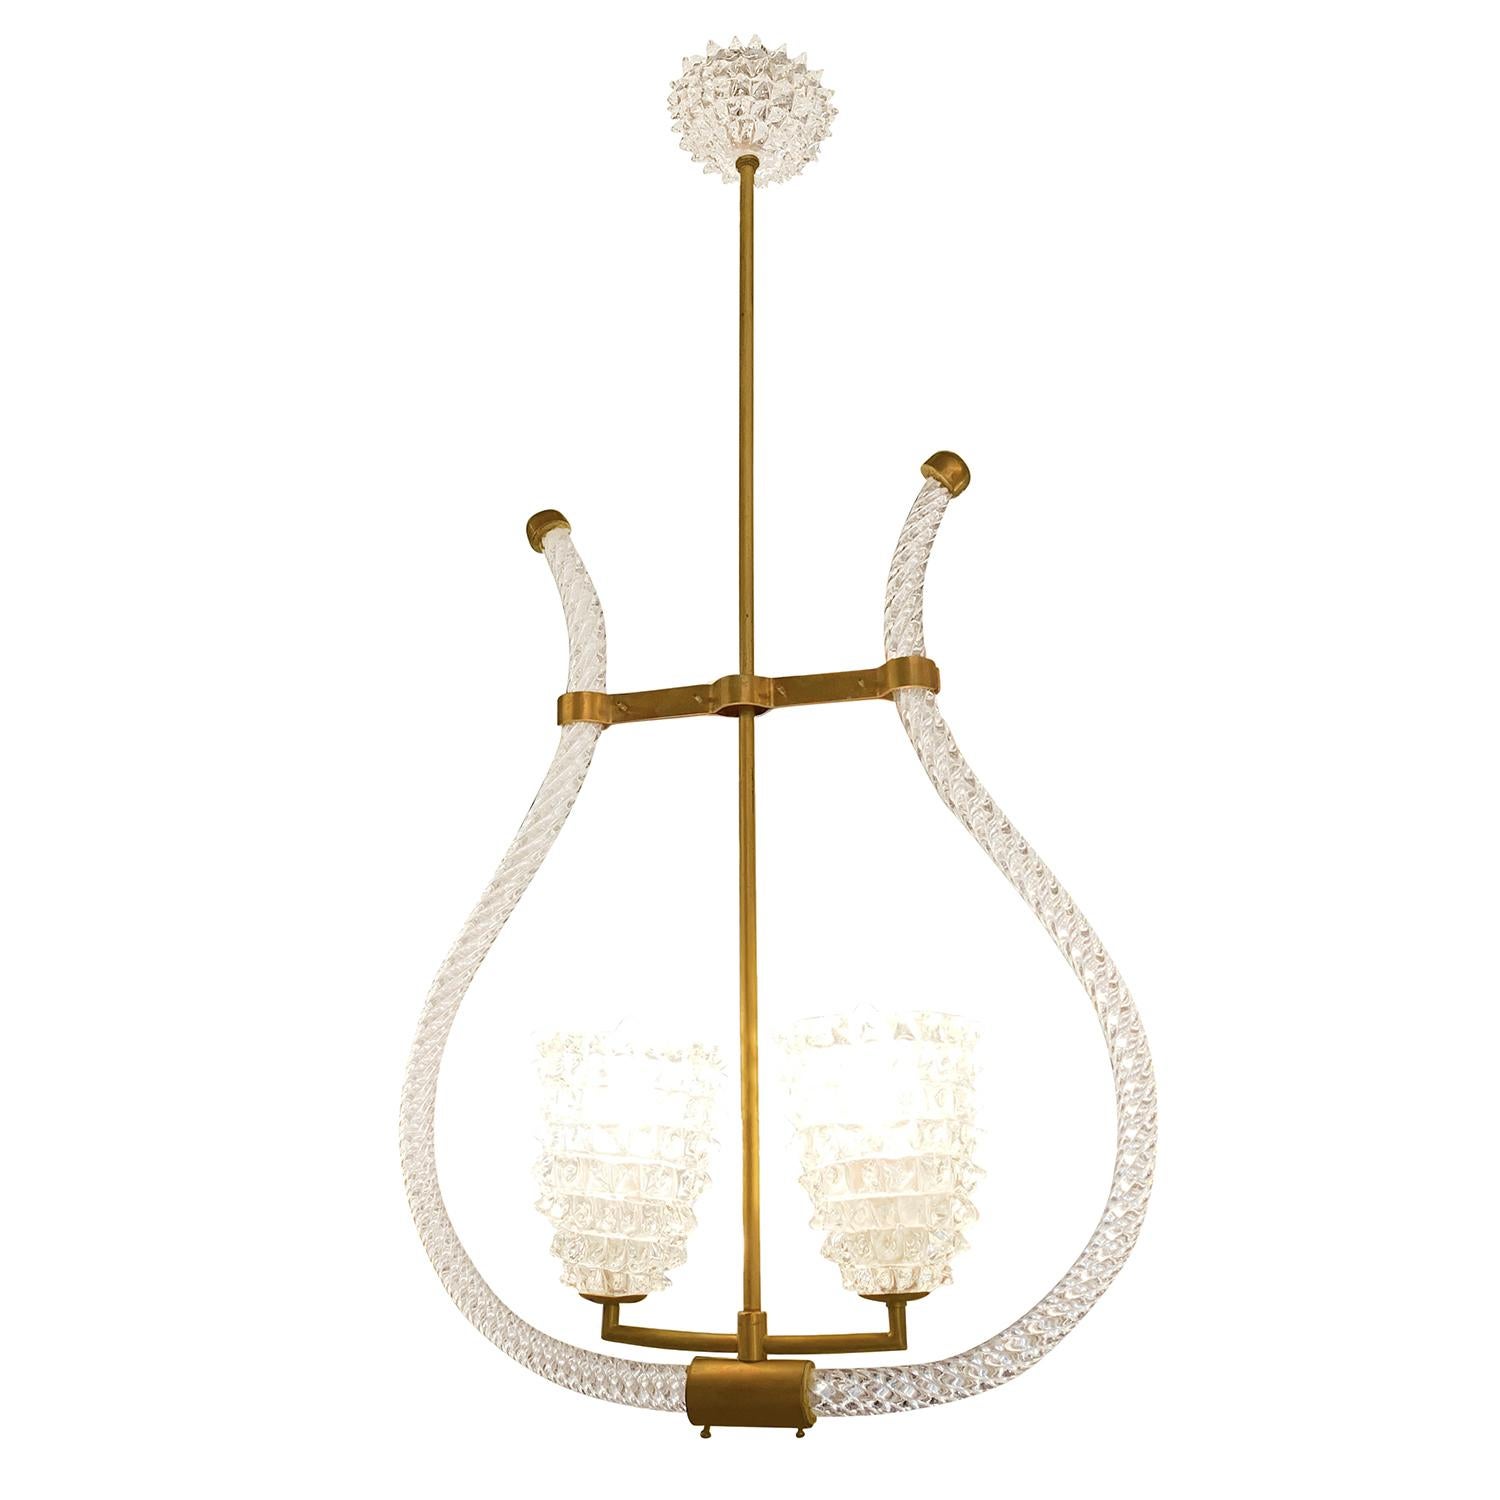 A vintage Mid-Century Modern Italian Murano glass ceiling light with a brass structure in the shape of a harp and two-light. Produced by Barovier & Toso, featuring a two light socket in good condition. The wires have been renewed. Wear consistent